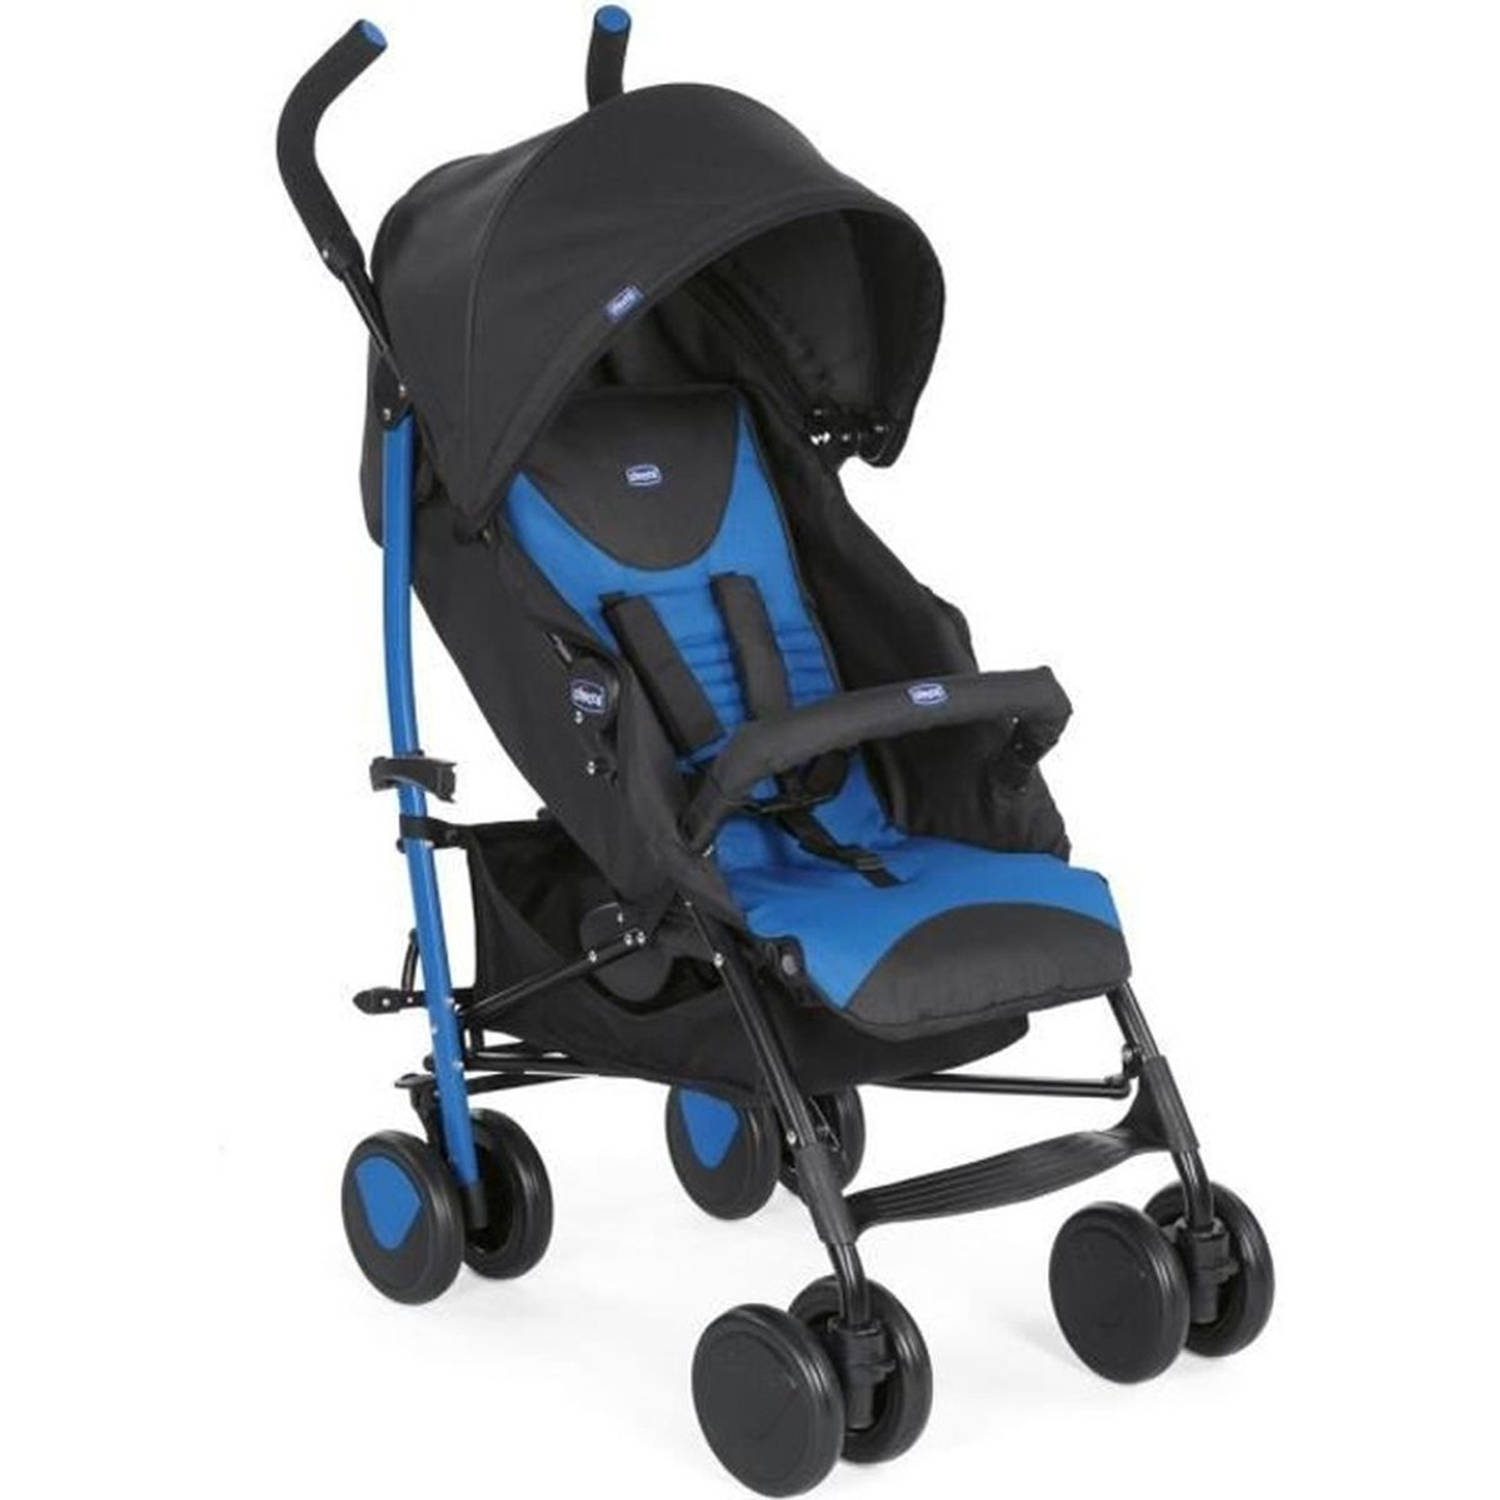 Chicco Echo Buggy Complete - MR. Blue